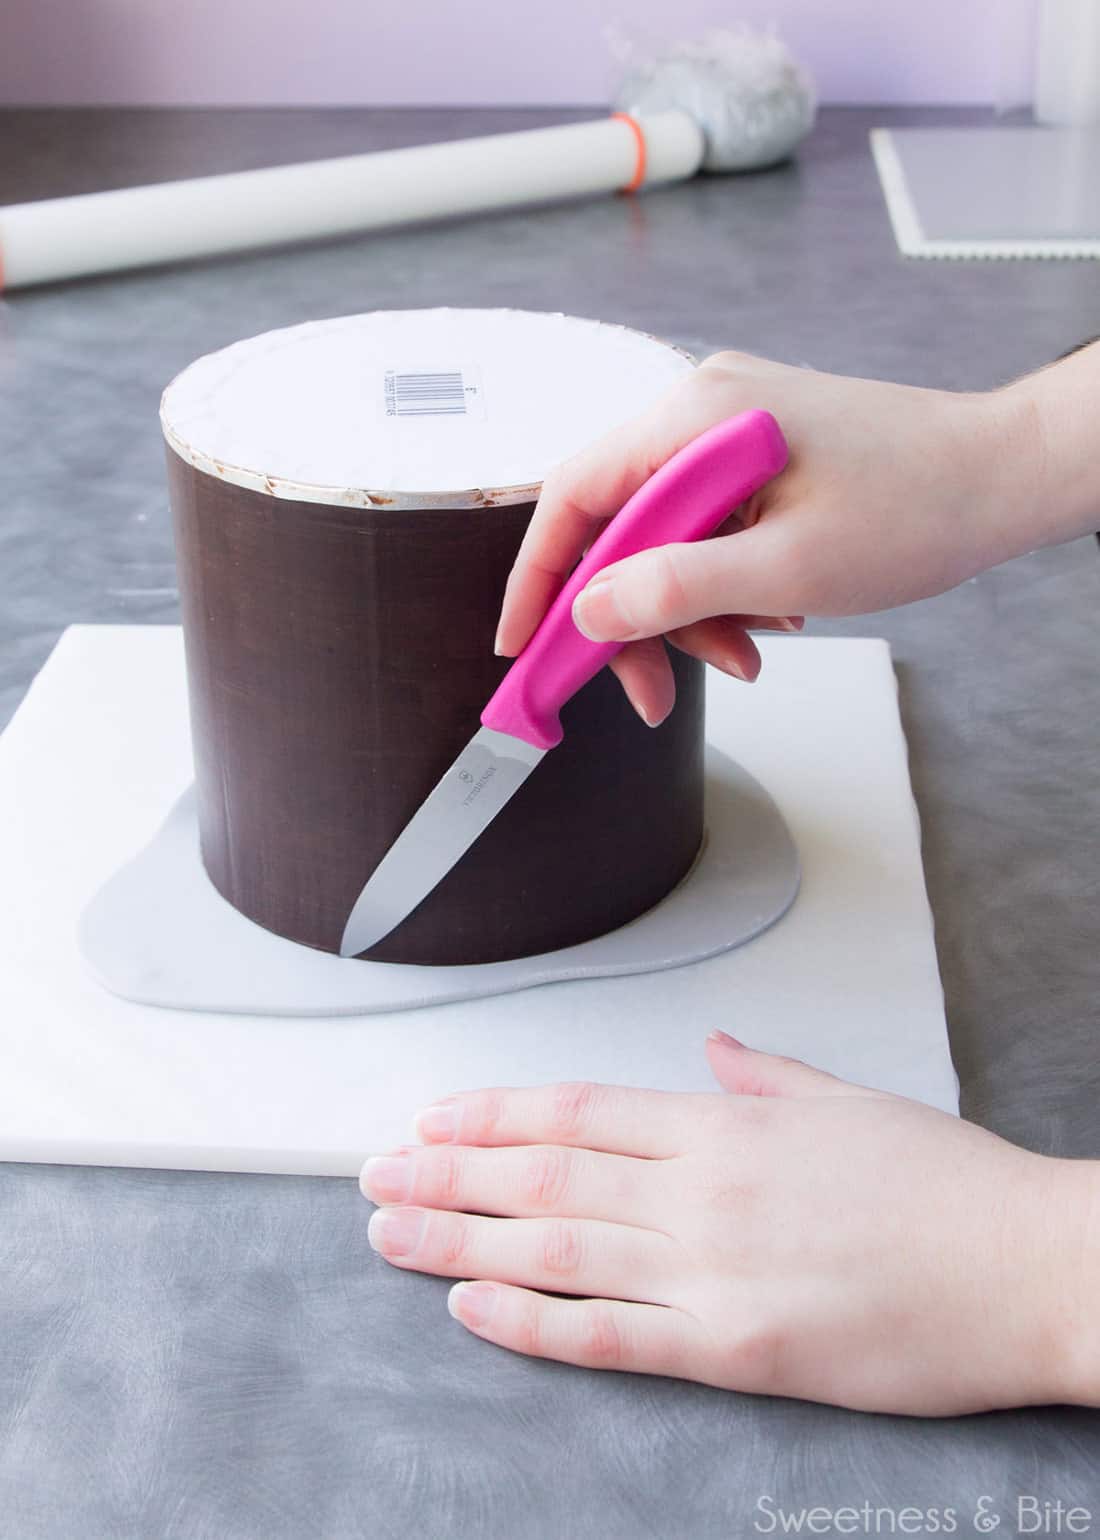 A hand using a small knife to trim the fondant on the upside down cake.